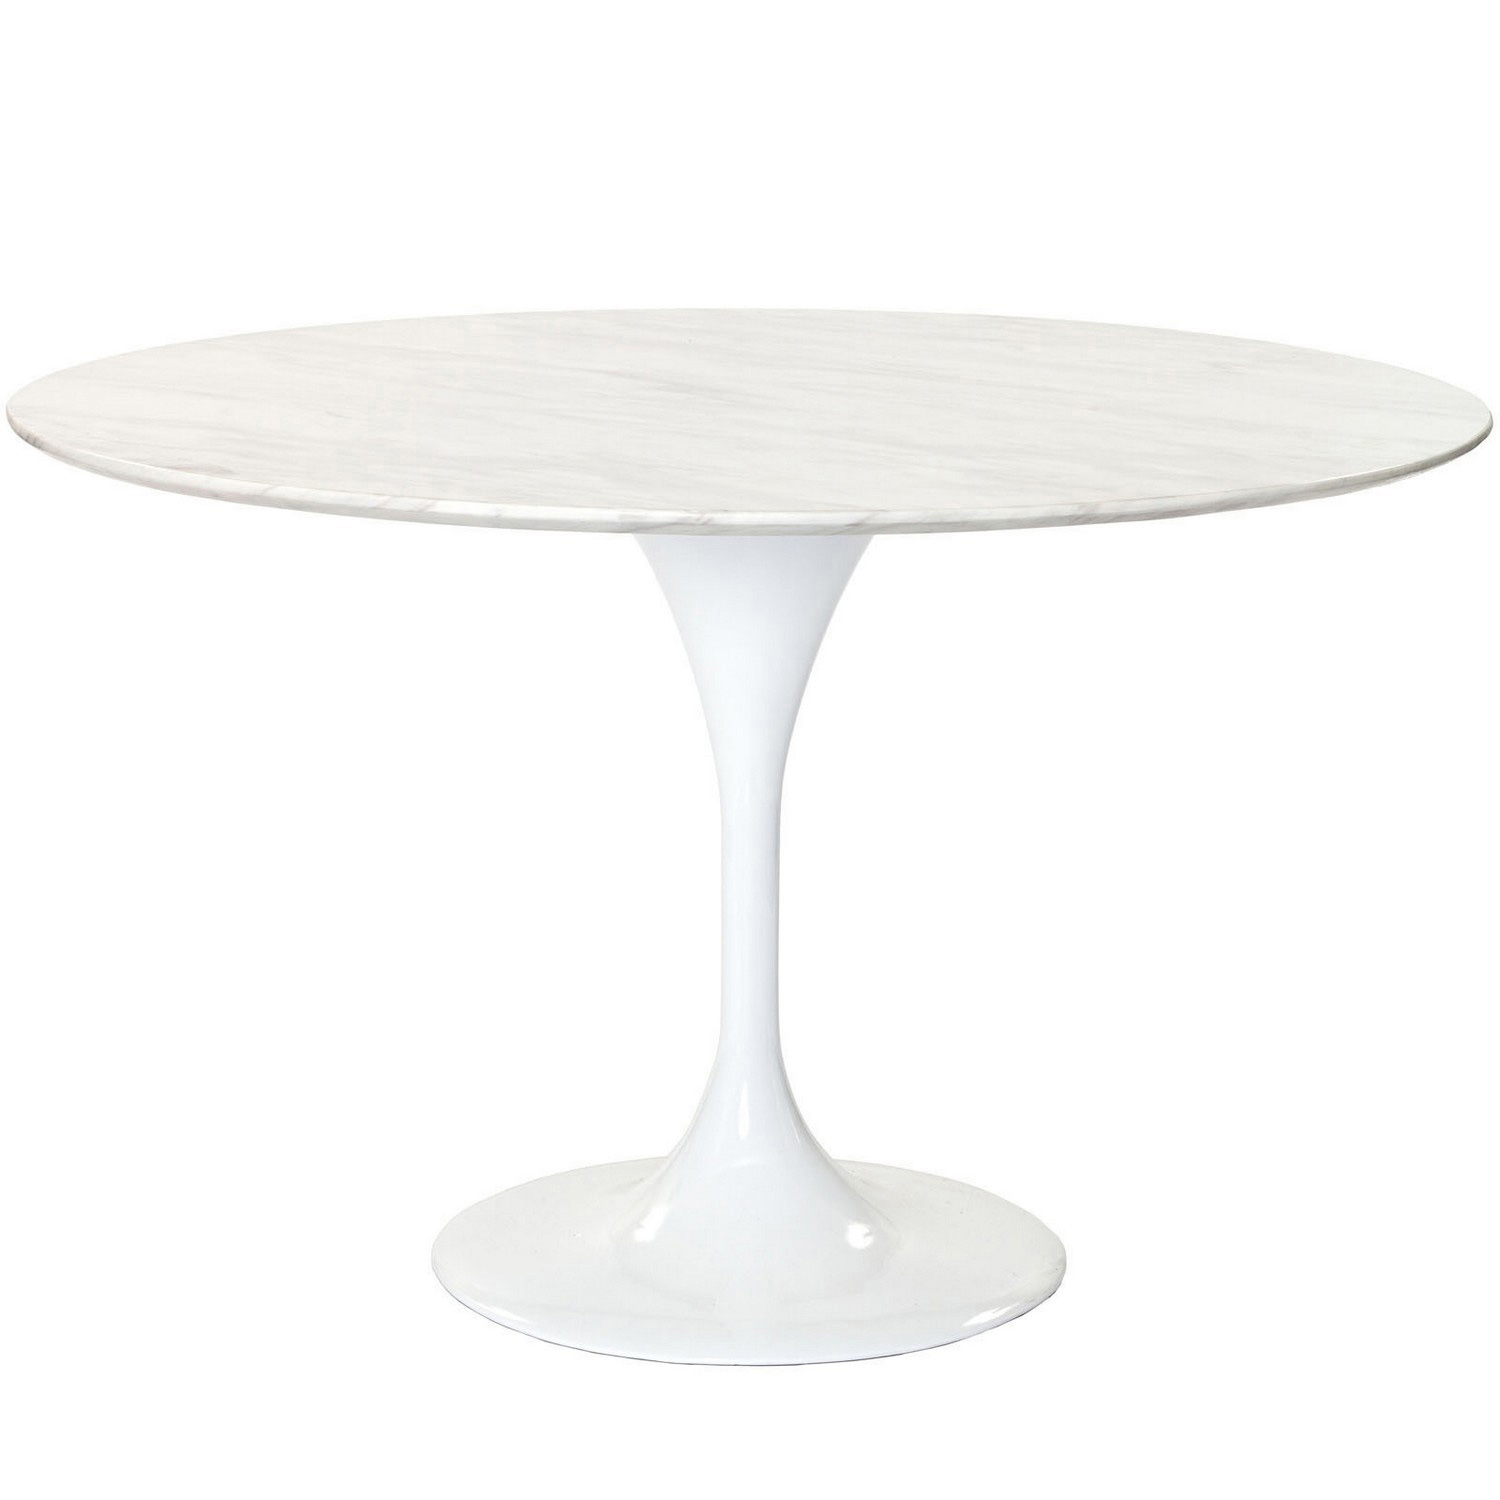 Modway Lippa 48 Marble Dining Table - White